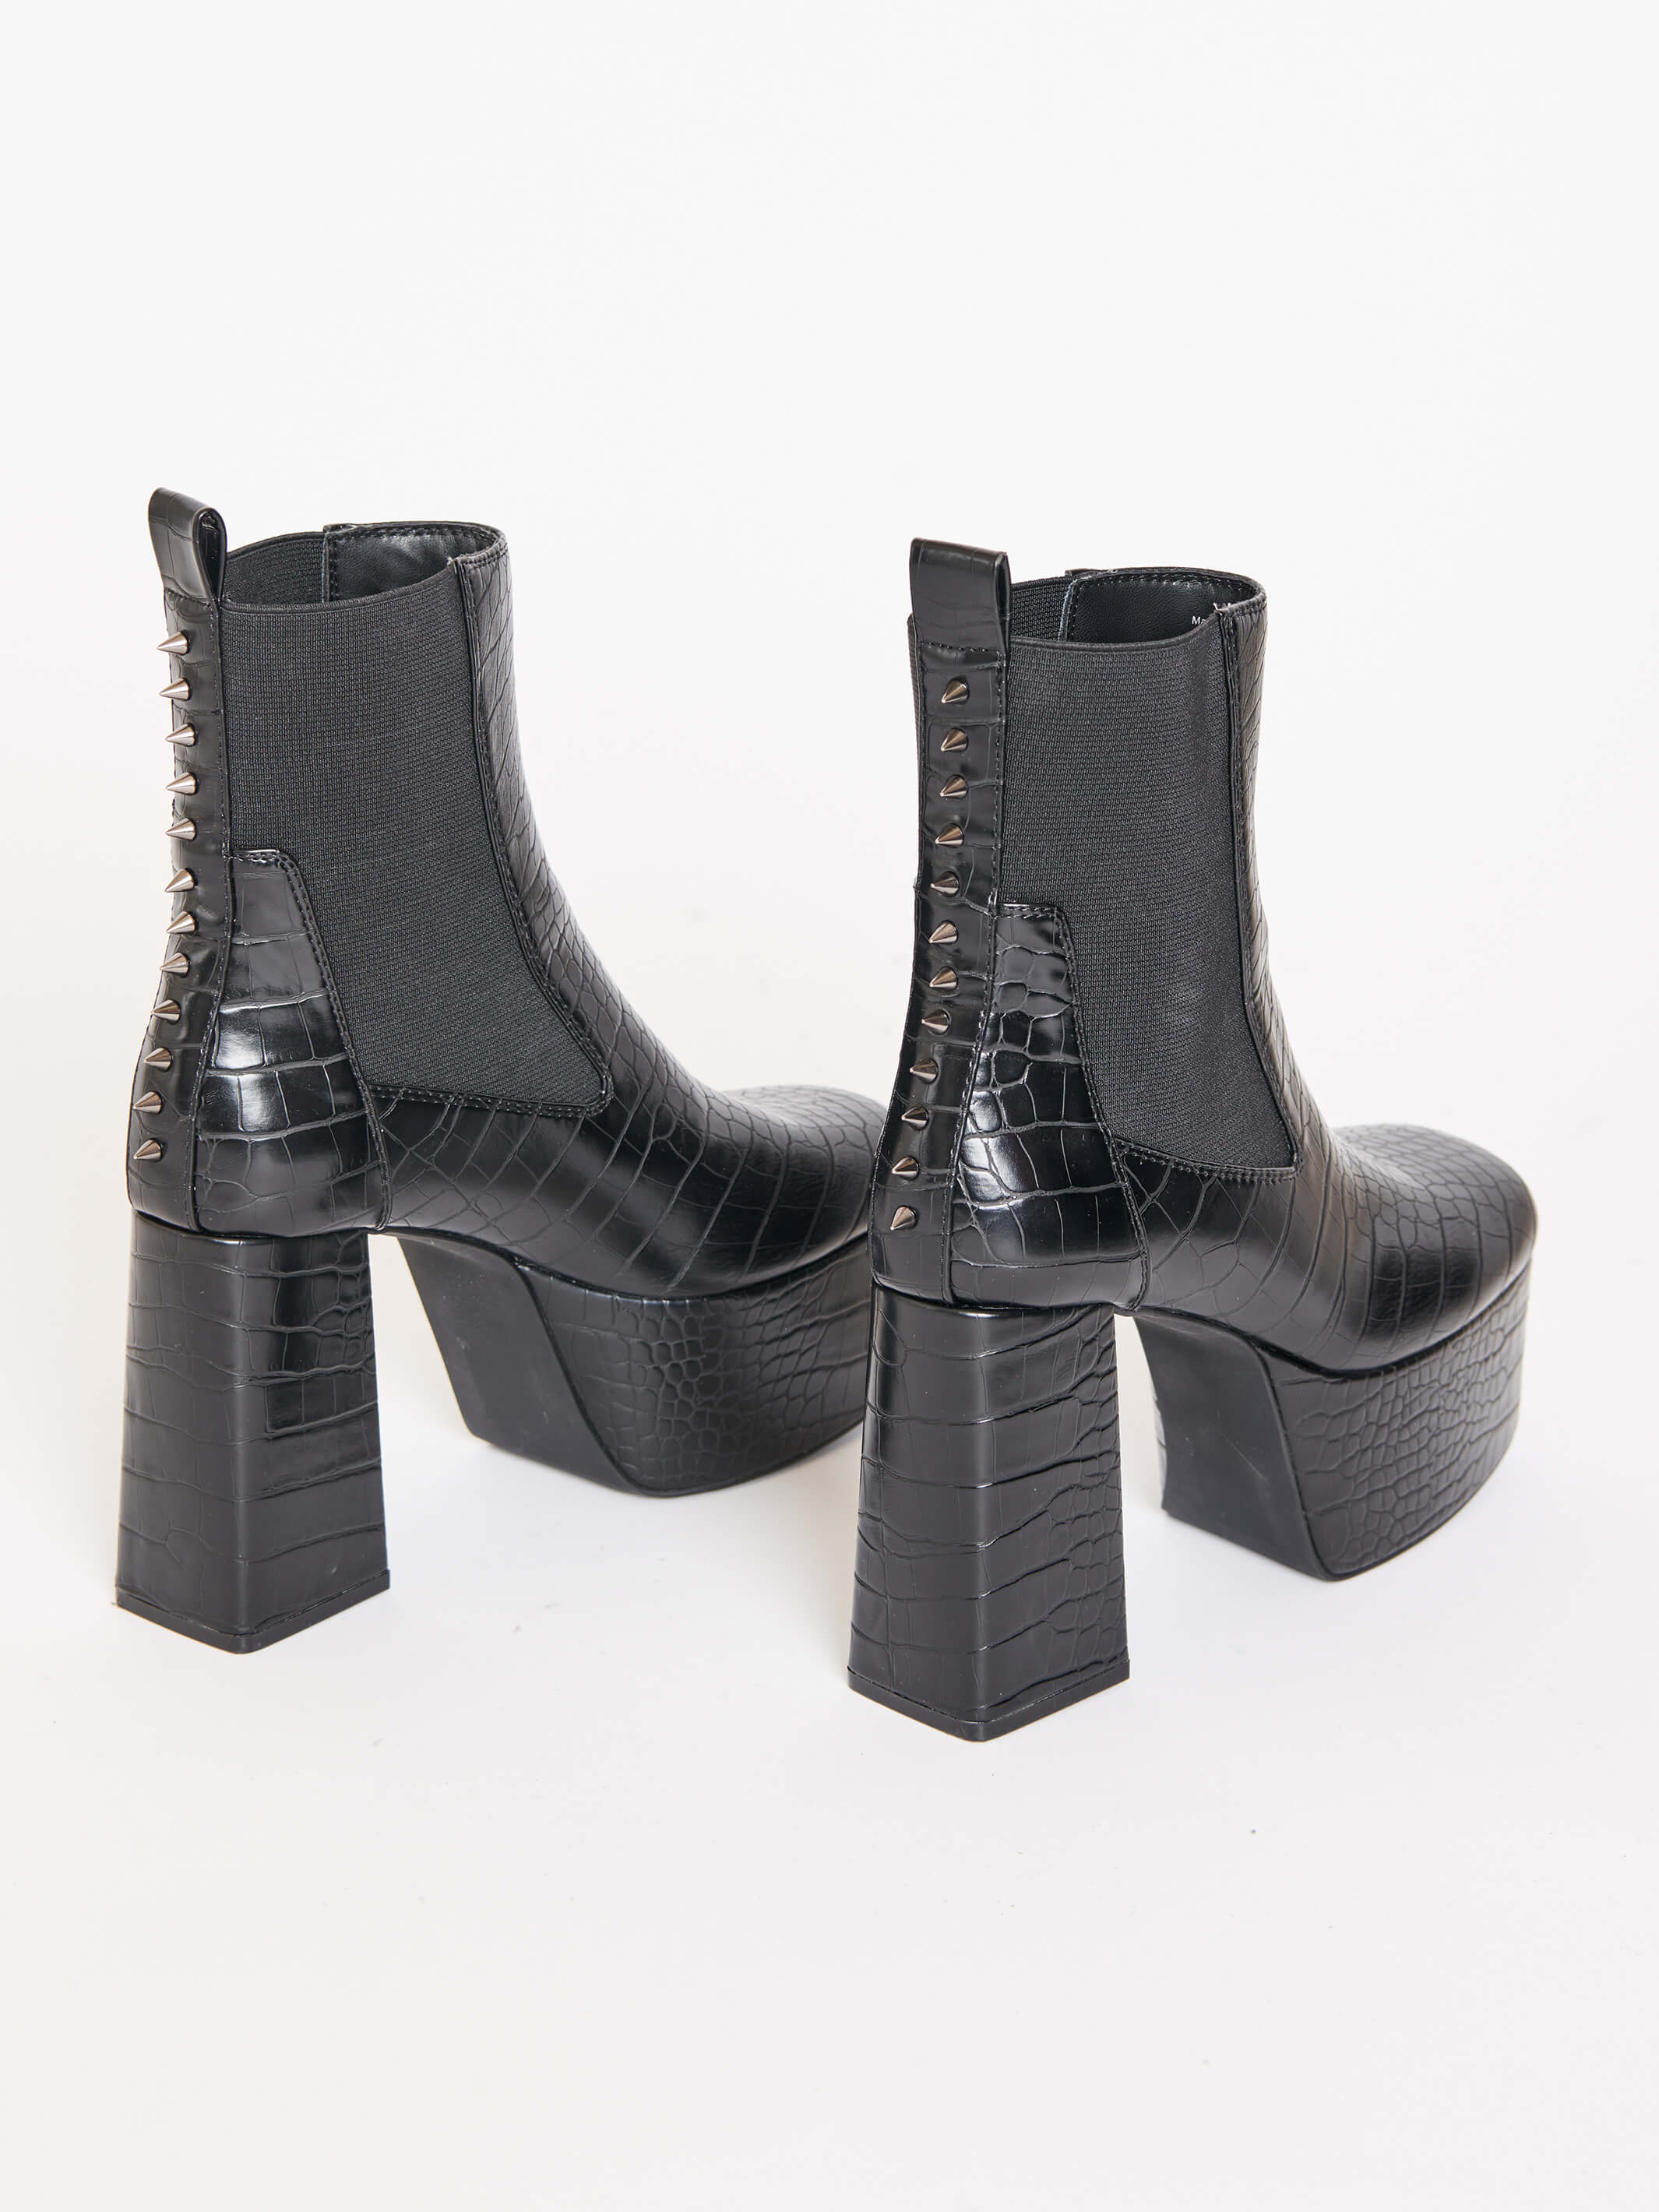 faux croc skin platform boots with spikes down the back